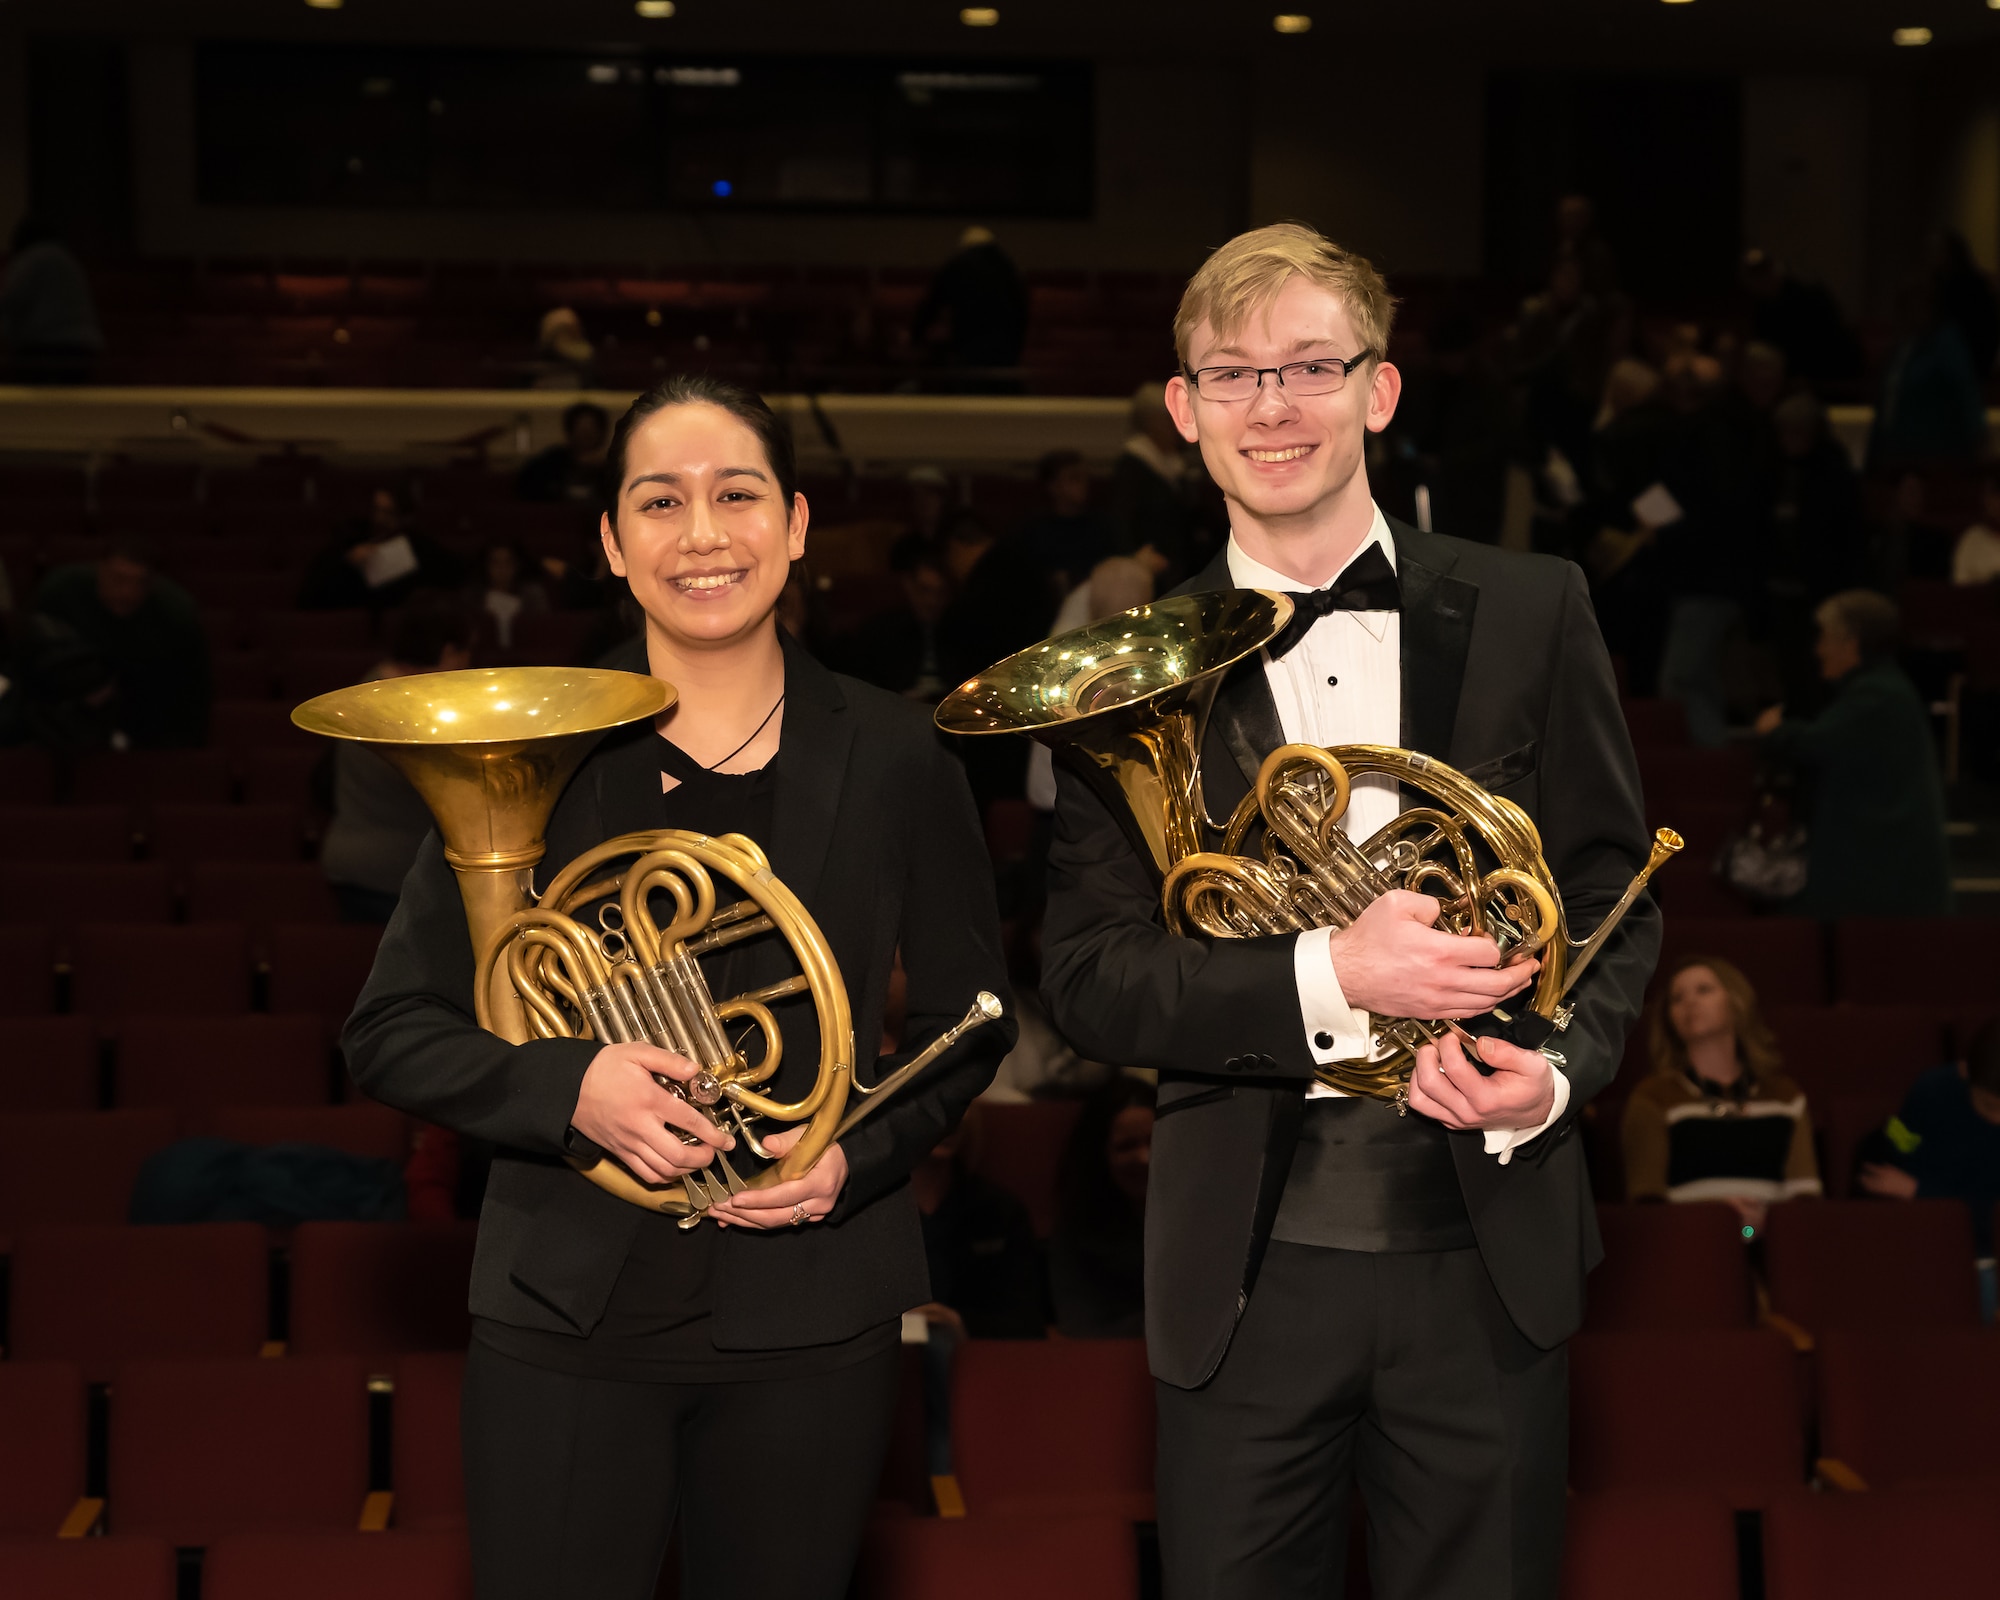 Andrew Stump (right) poses with another French hornist on stage prior to the closing concert of The U.S. Air Force Band's 2019 Collegiate Symposium at the Rachel M. Schlesinger Concert Hall and Arts Center in Alexandria, Virginia. Stump, son of U.S. Air Force Band clarinetist Senior Master Sgt. David Stump, had the privilege of performing with the U.S. Air Force Concert Band as part of the symposium. (U.S. Air Force Photo by MSgt Brandon Chaney)